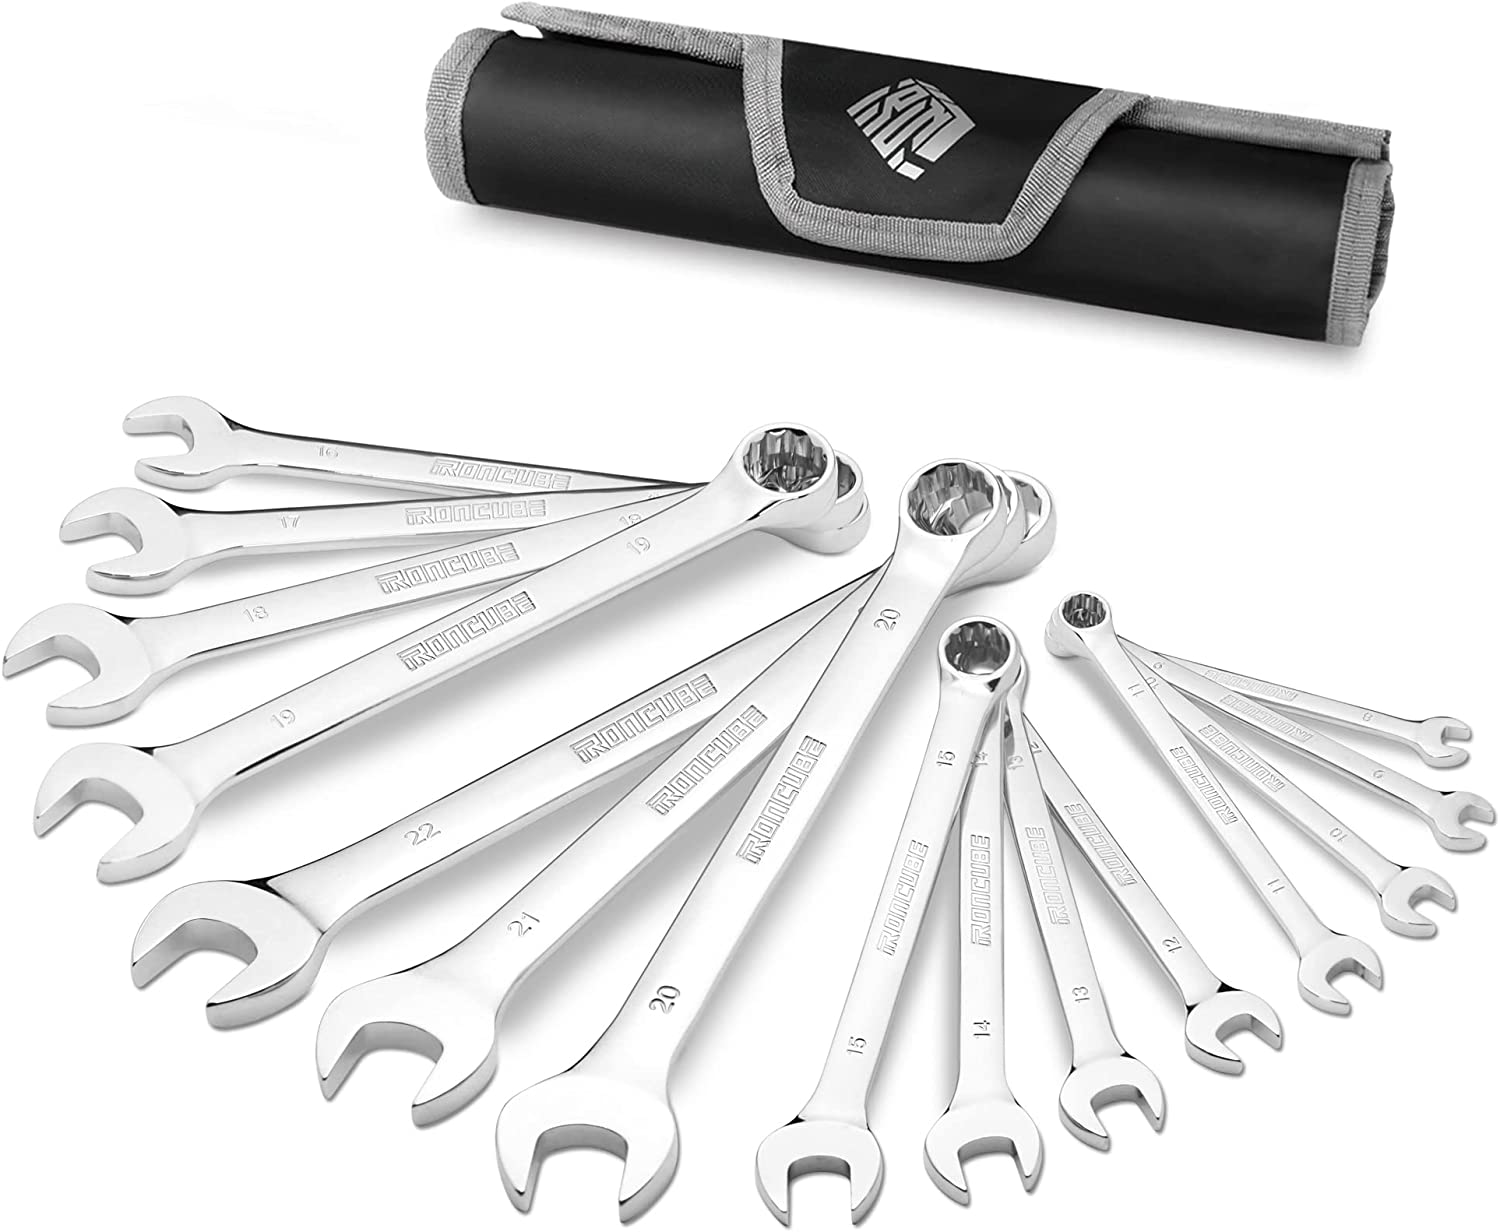 IRONCUBE Combination Wrench Spanner Set Combination Spanner 8-22mm CRV Mirror Finish Car Maintenance Assembly DIY Storage Bag Included 15 Pieces